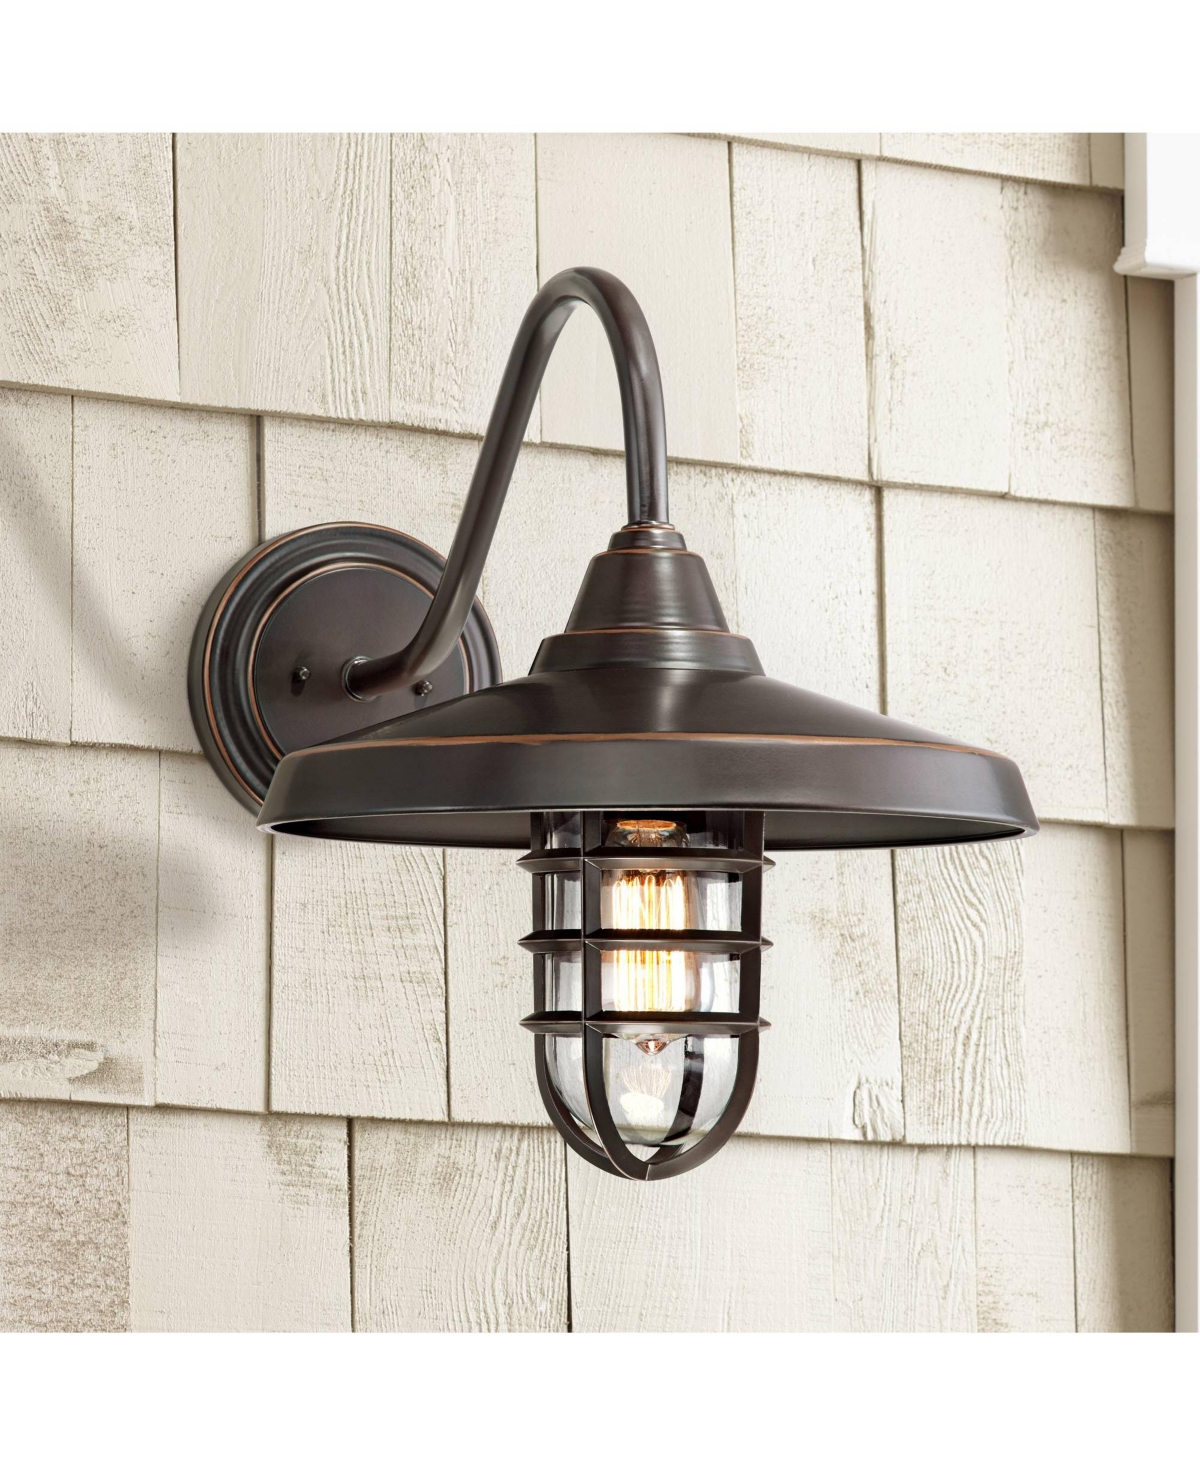 Marlowe Rustic Industrial Farmhouse Outdoor Wall Light Fixture Painted Bronze Cage 16 3/4" Clear Glass for Exterior Barn Deck House Porch Yard Patio O